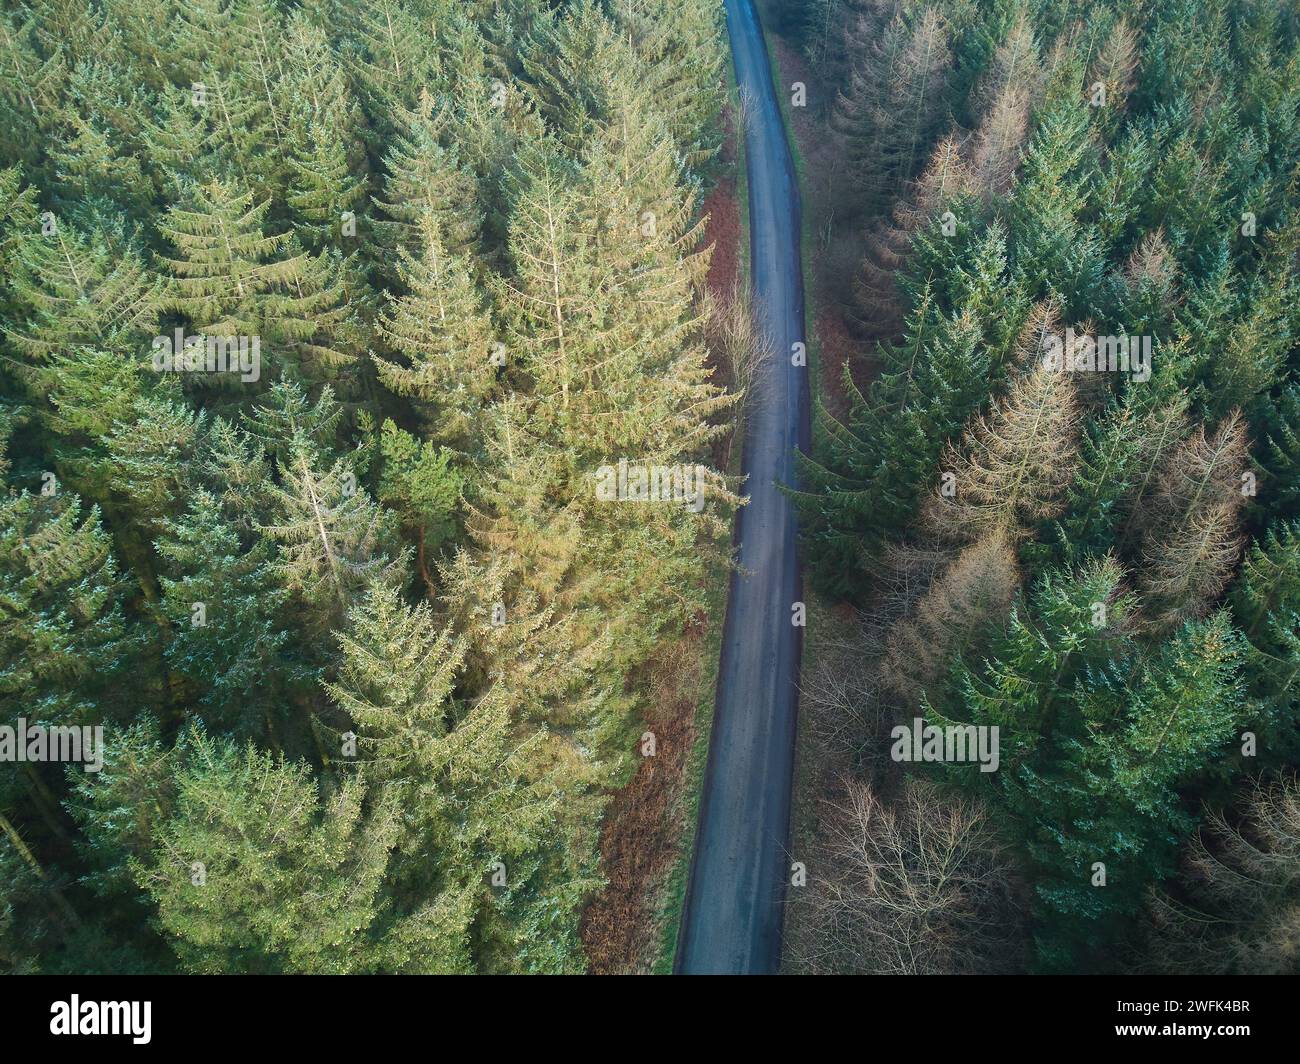 Aerial view of a road passing through a conifer plantation Stock Photo